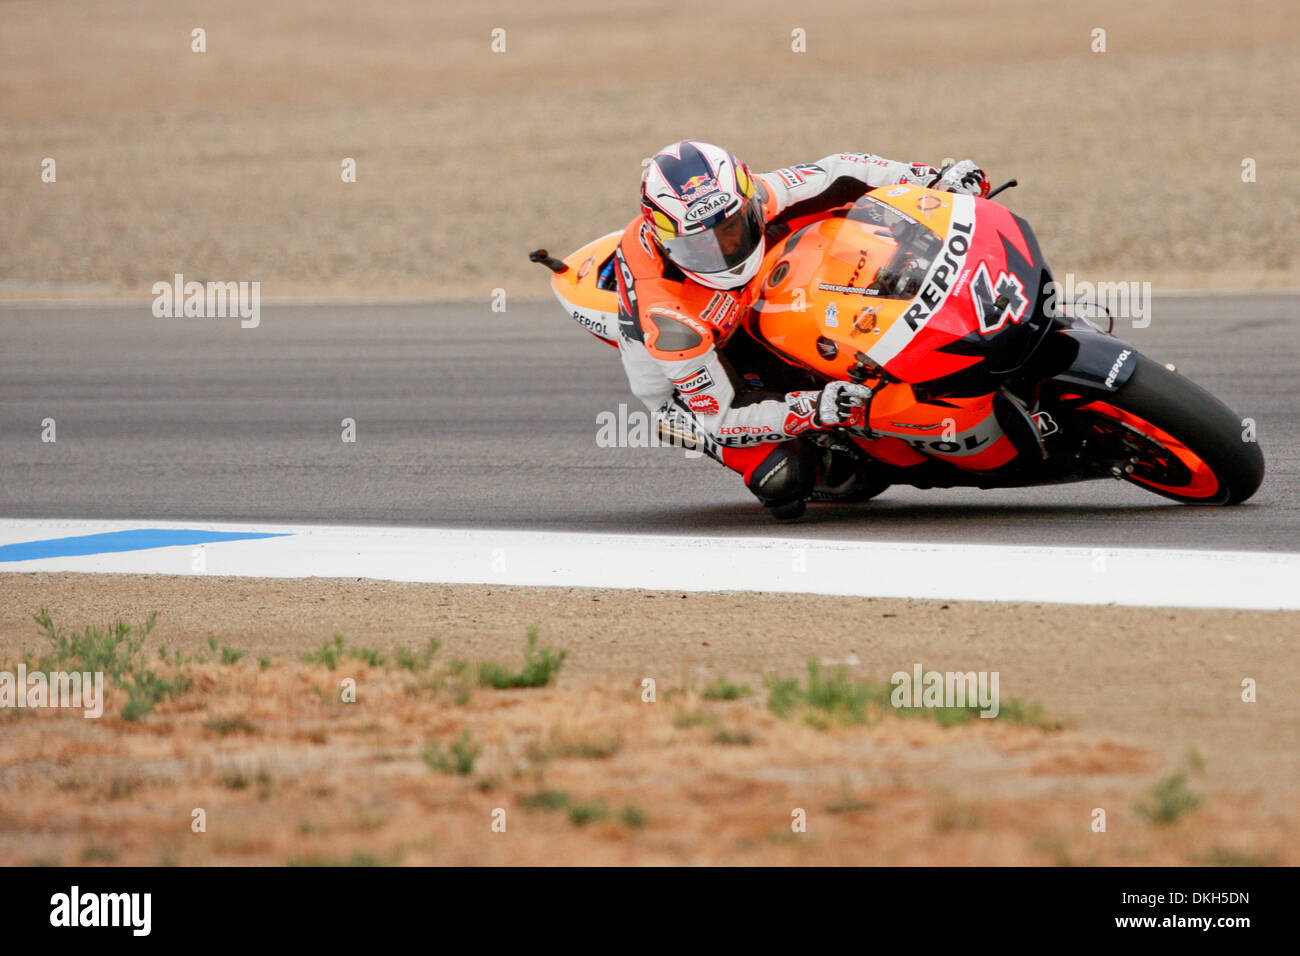 July 05, 2009 - Monterey, California, USA - 05 July 2009: Andrea Dovizioso, of Forlimpopoli, Italy, rides the #4 motorcycle for the Respol Honda Team Honda during MotoGP warm-up at the  Mazda Raceway Laguna Seca, in Monterey, Calif. MotoGP's 8th race is set to take place on today, July 5, 2009 at 14:00 PST prior to making its next stop  in Germany. (Credit Image: © Konsta Goumenidi Stock Photo